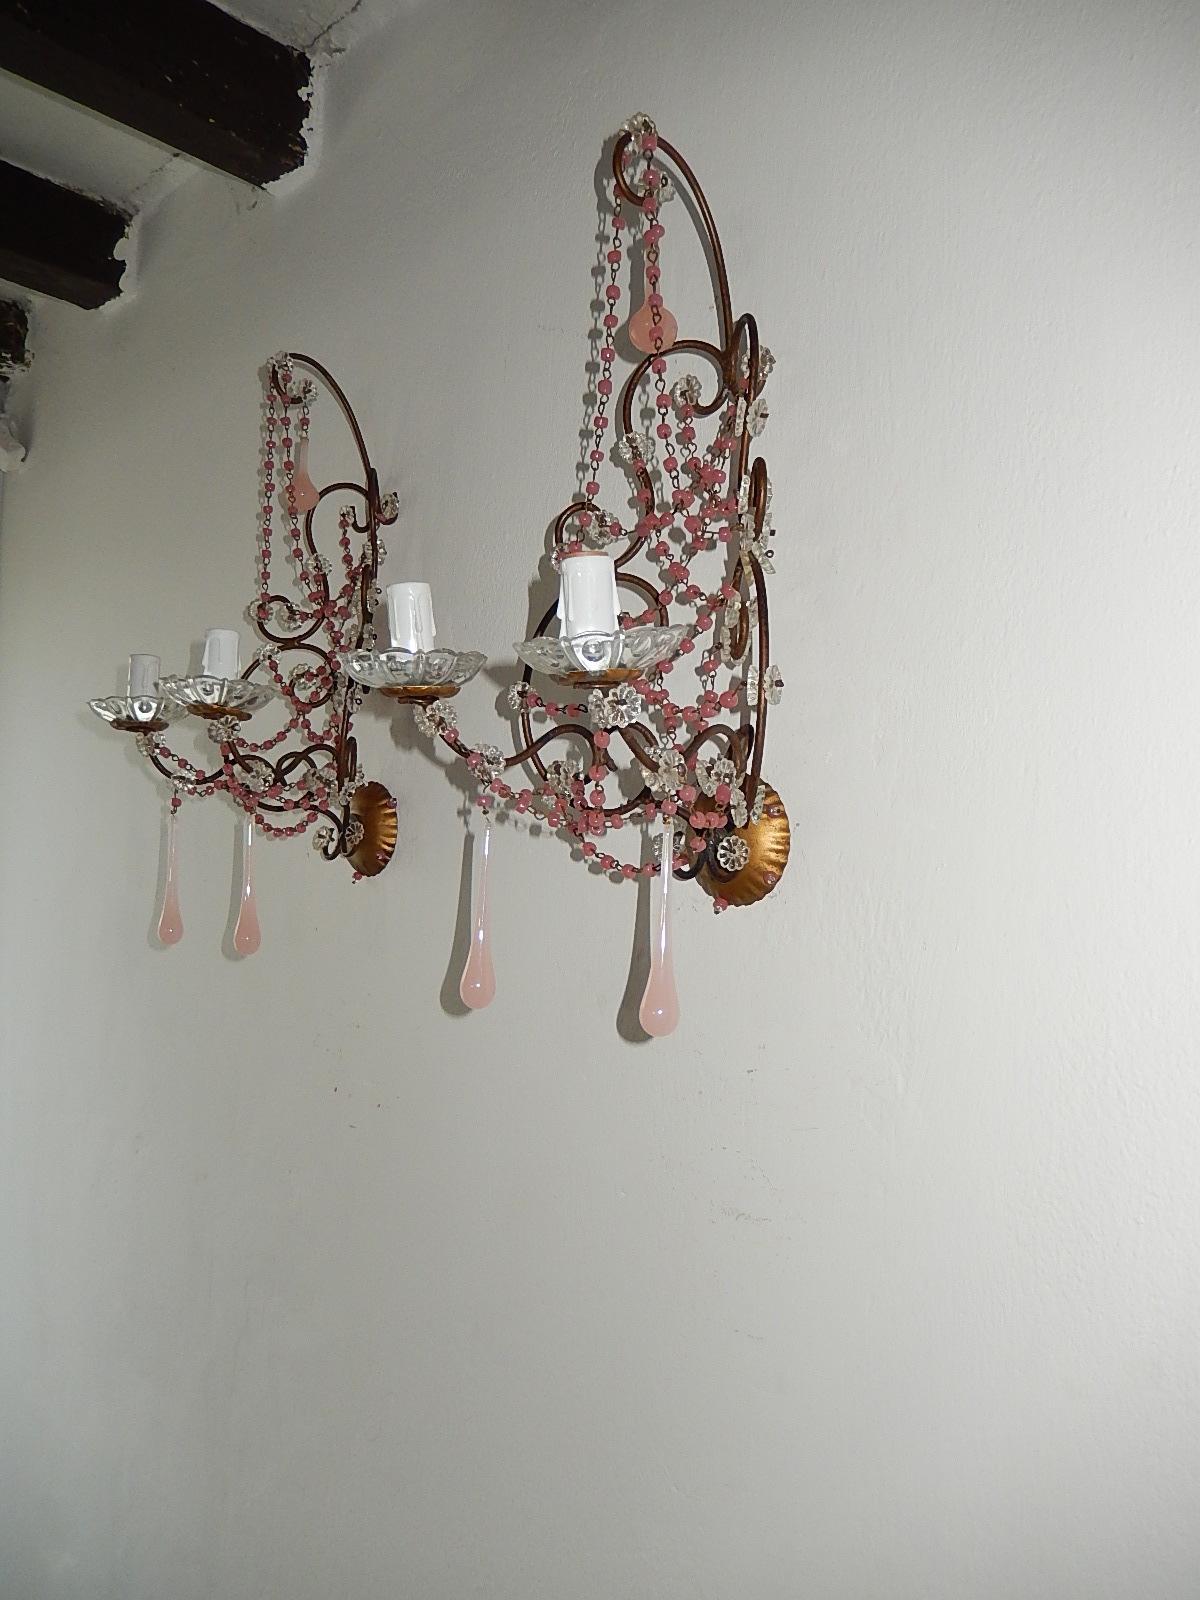 Housing 2-light, sitting in crystal bobeches.  Swags of pink opaline beads and florets throughout. Adorning Murano pink opaline drops. Beads on back plate as well. Will be newly rewired with certified US UL sockets for the Usa and appropriate